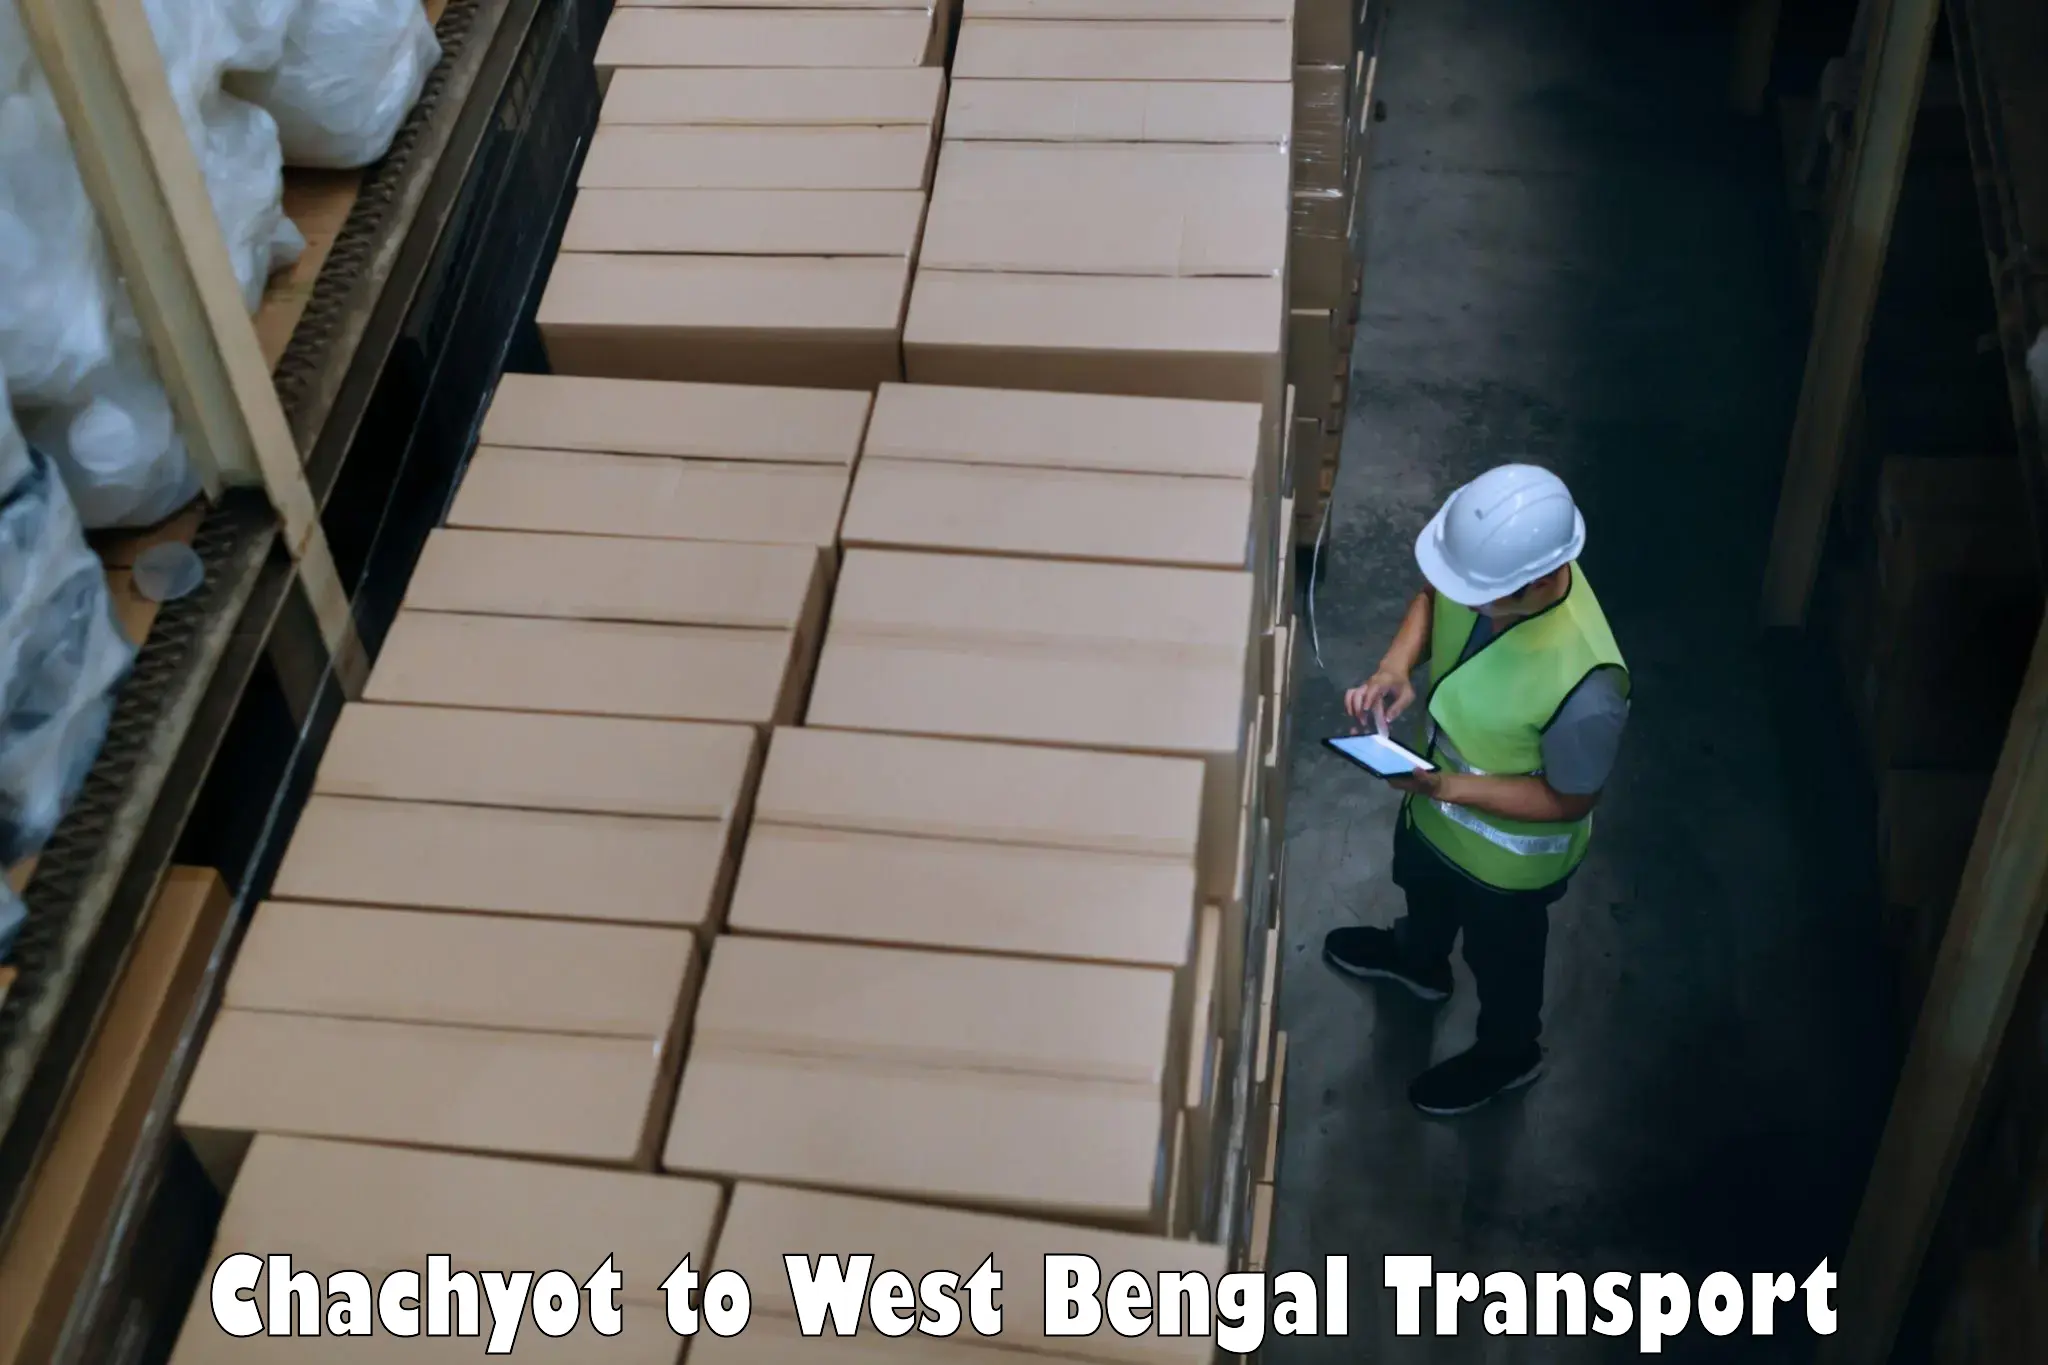 Delivery service Chachyot to Kolkata Port